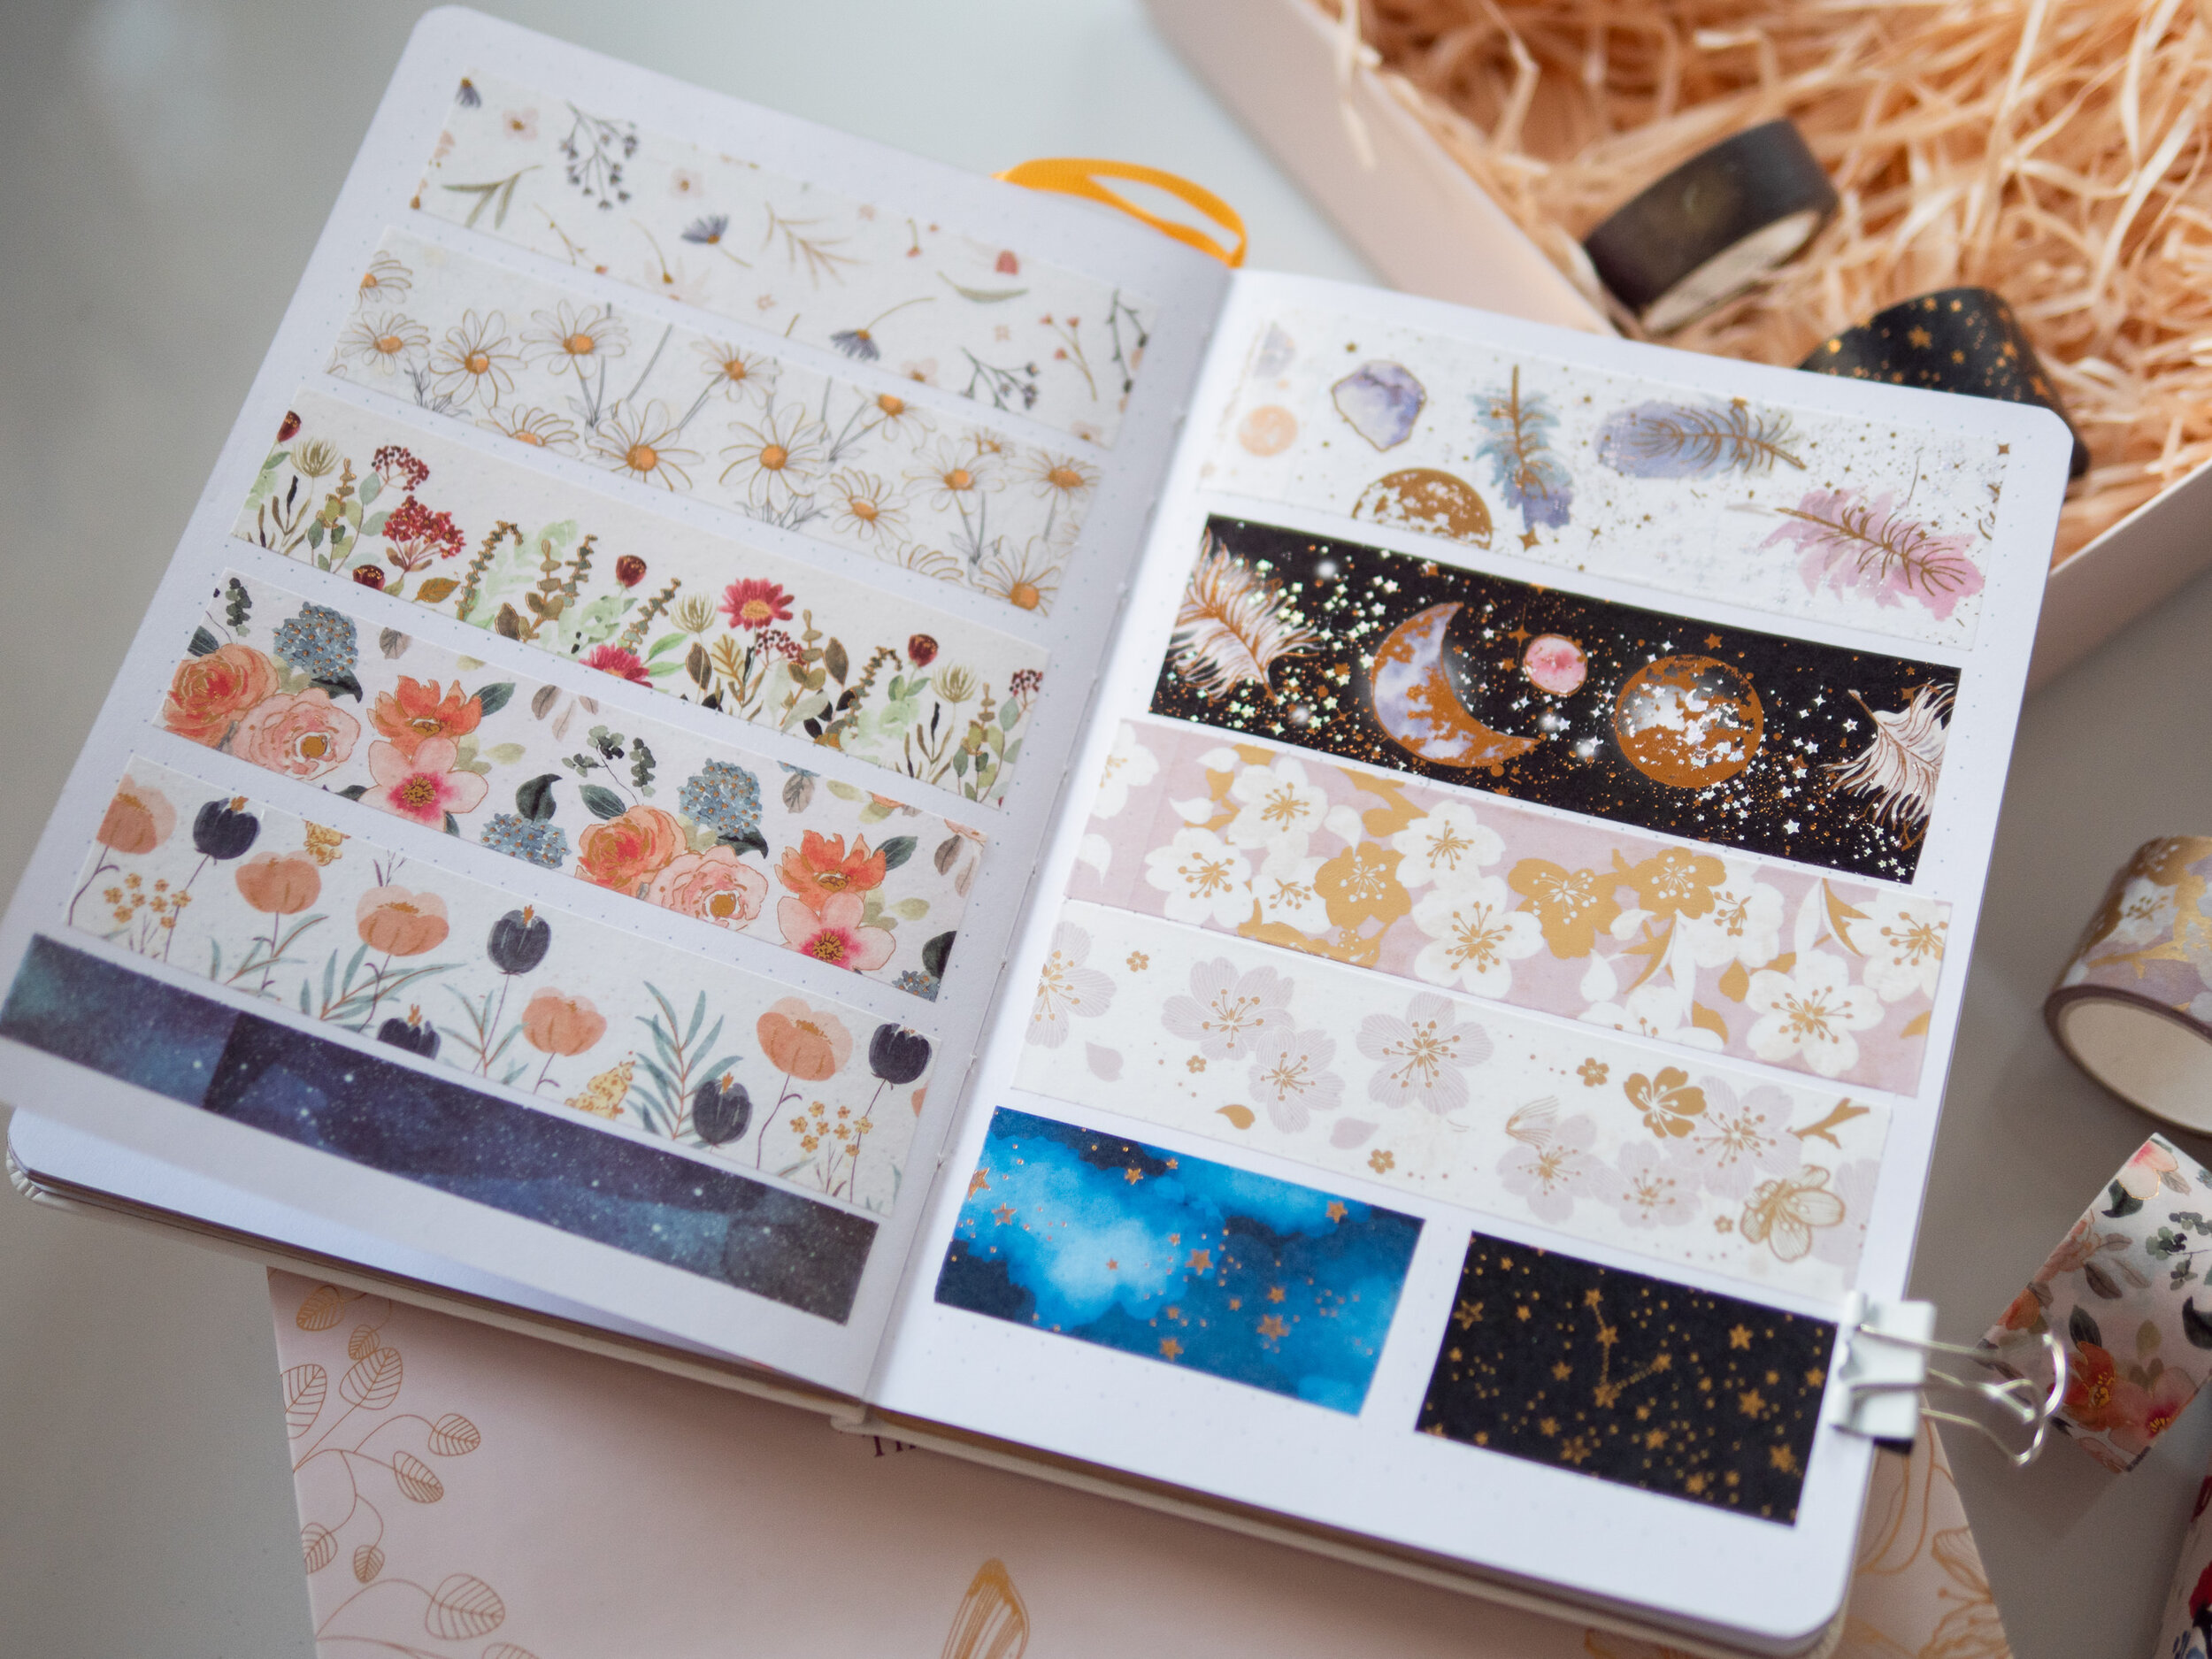 Stationery Haul & Review: The Washi Tape Shop — Erin Smith